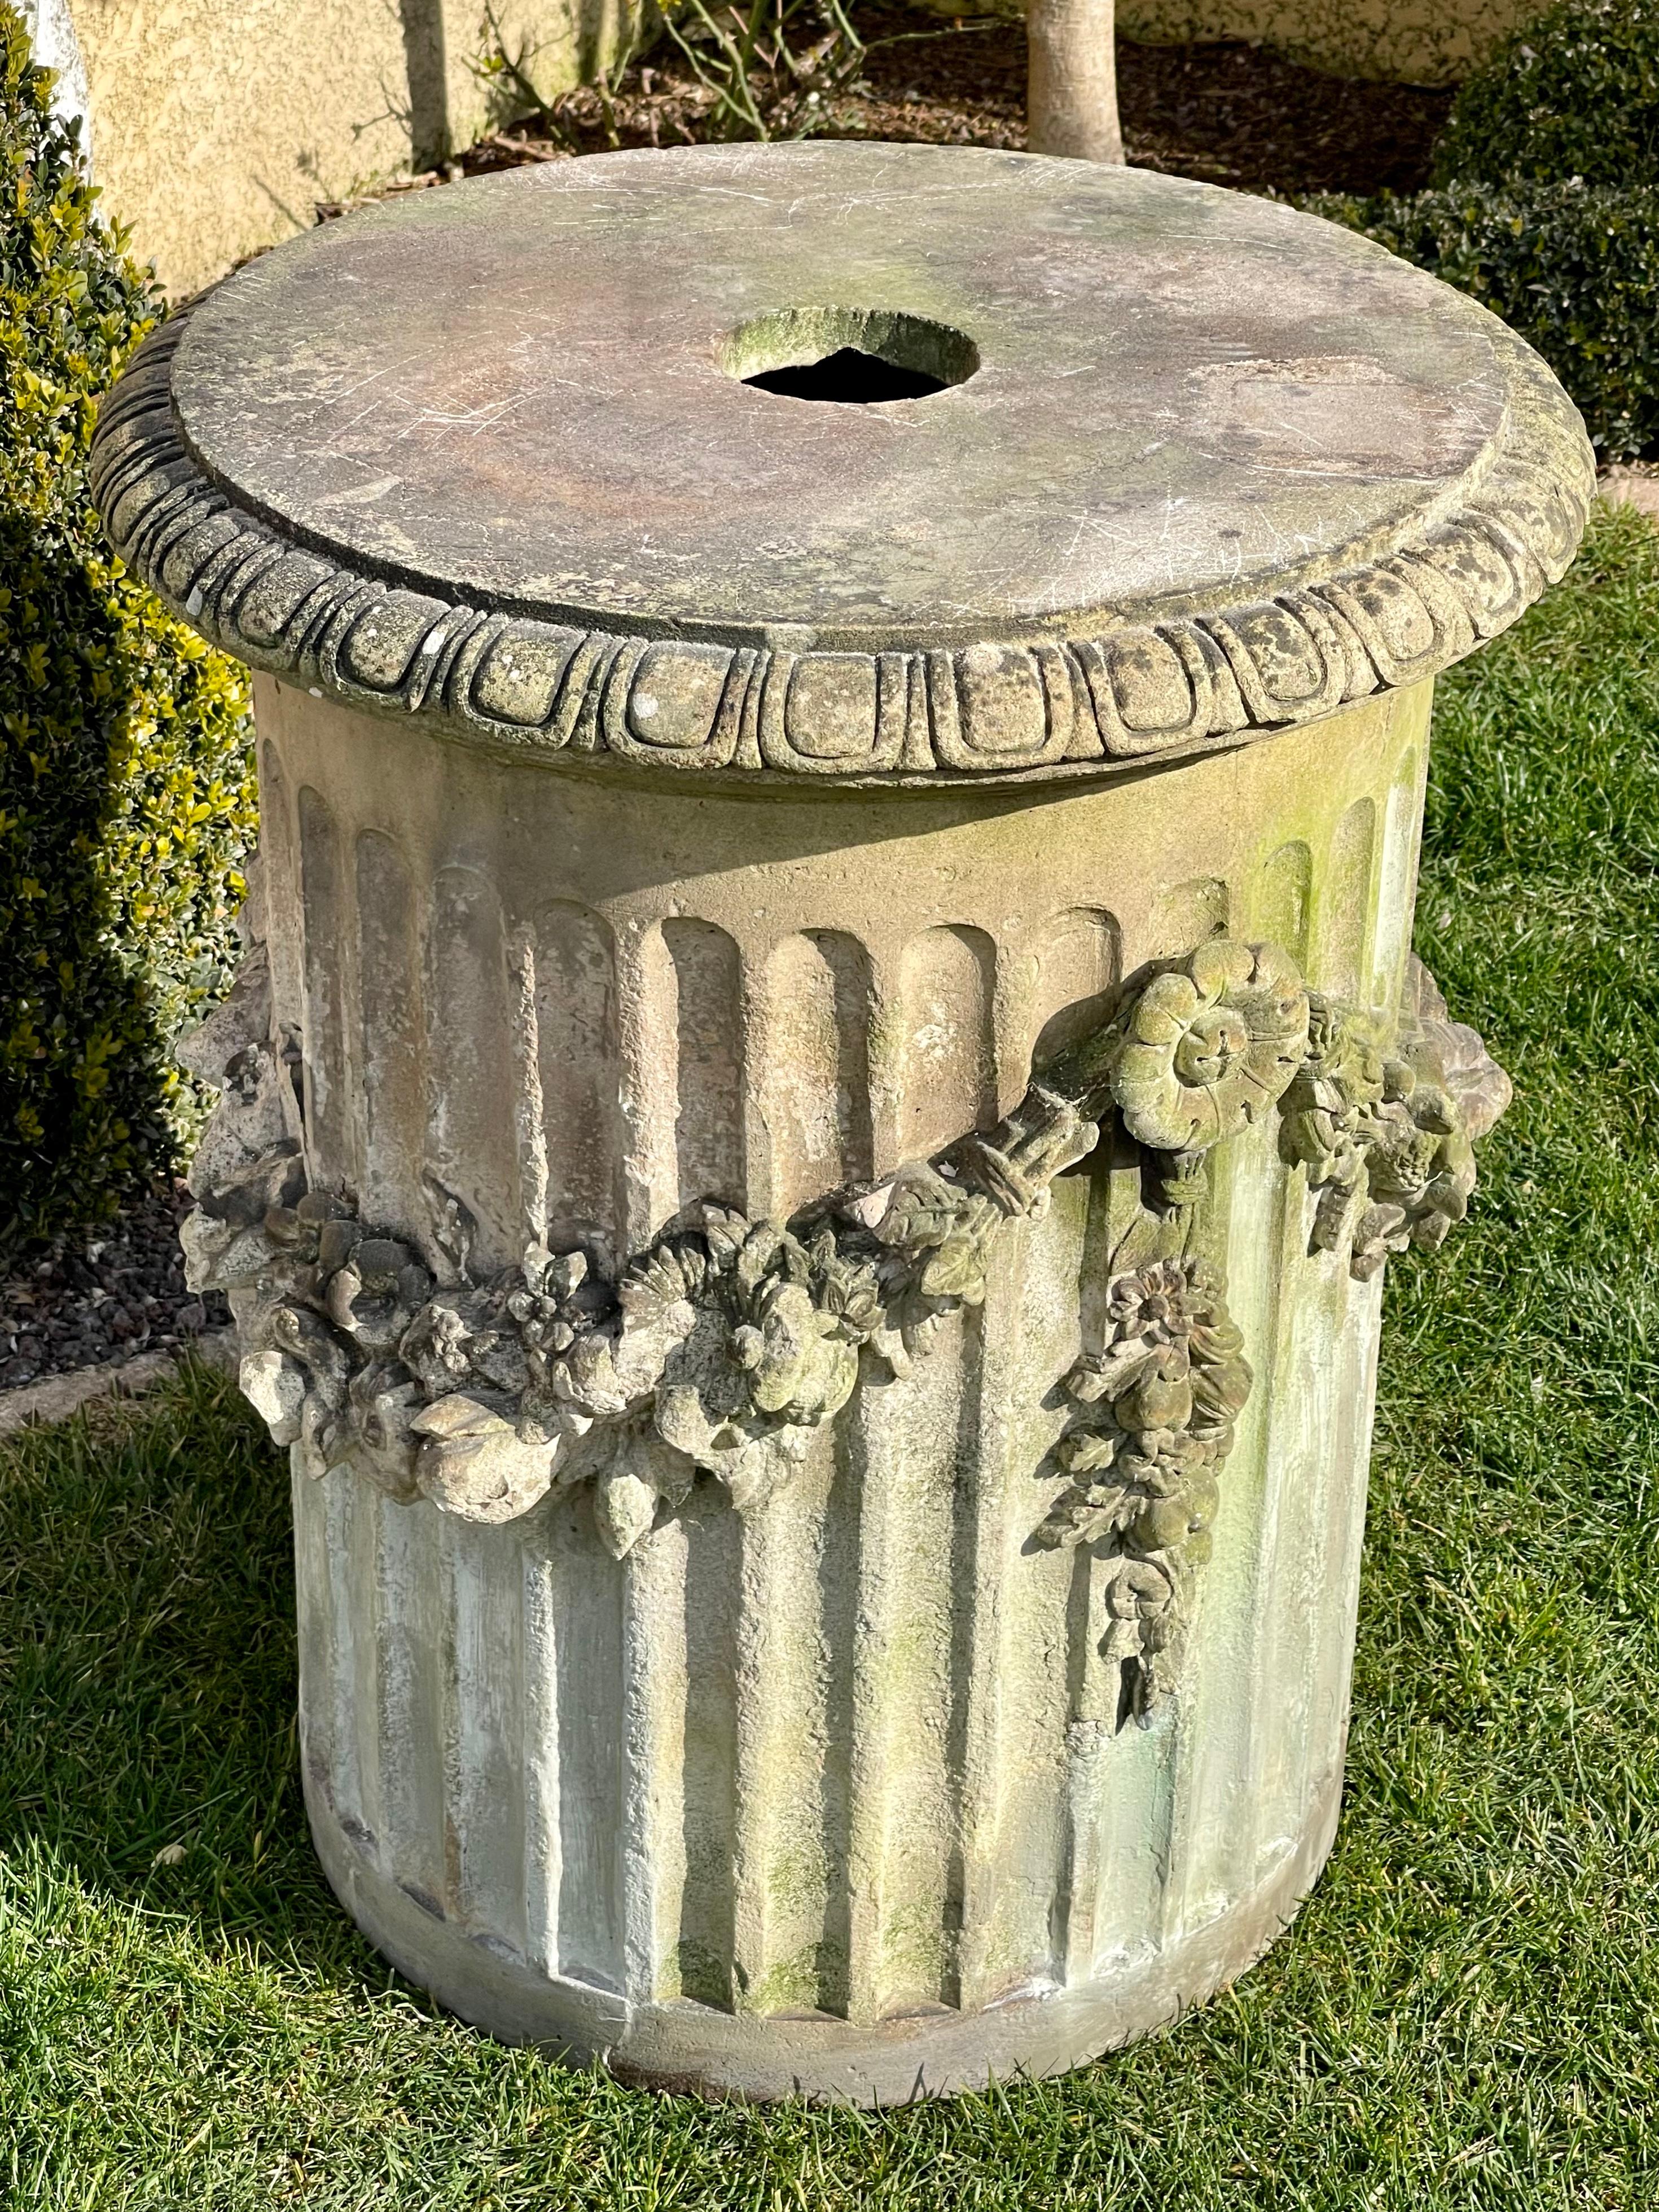 Terracotta column from the Louis XVI period dating from the end of the 18th and the beginning of the 19th century. It is decorated with garlands of flowers and is designed to be installed indoors or in a winter garden. Good condition.